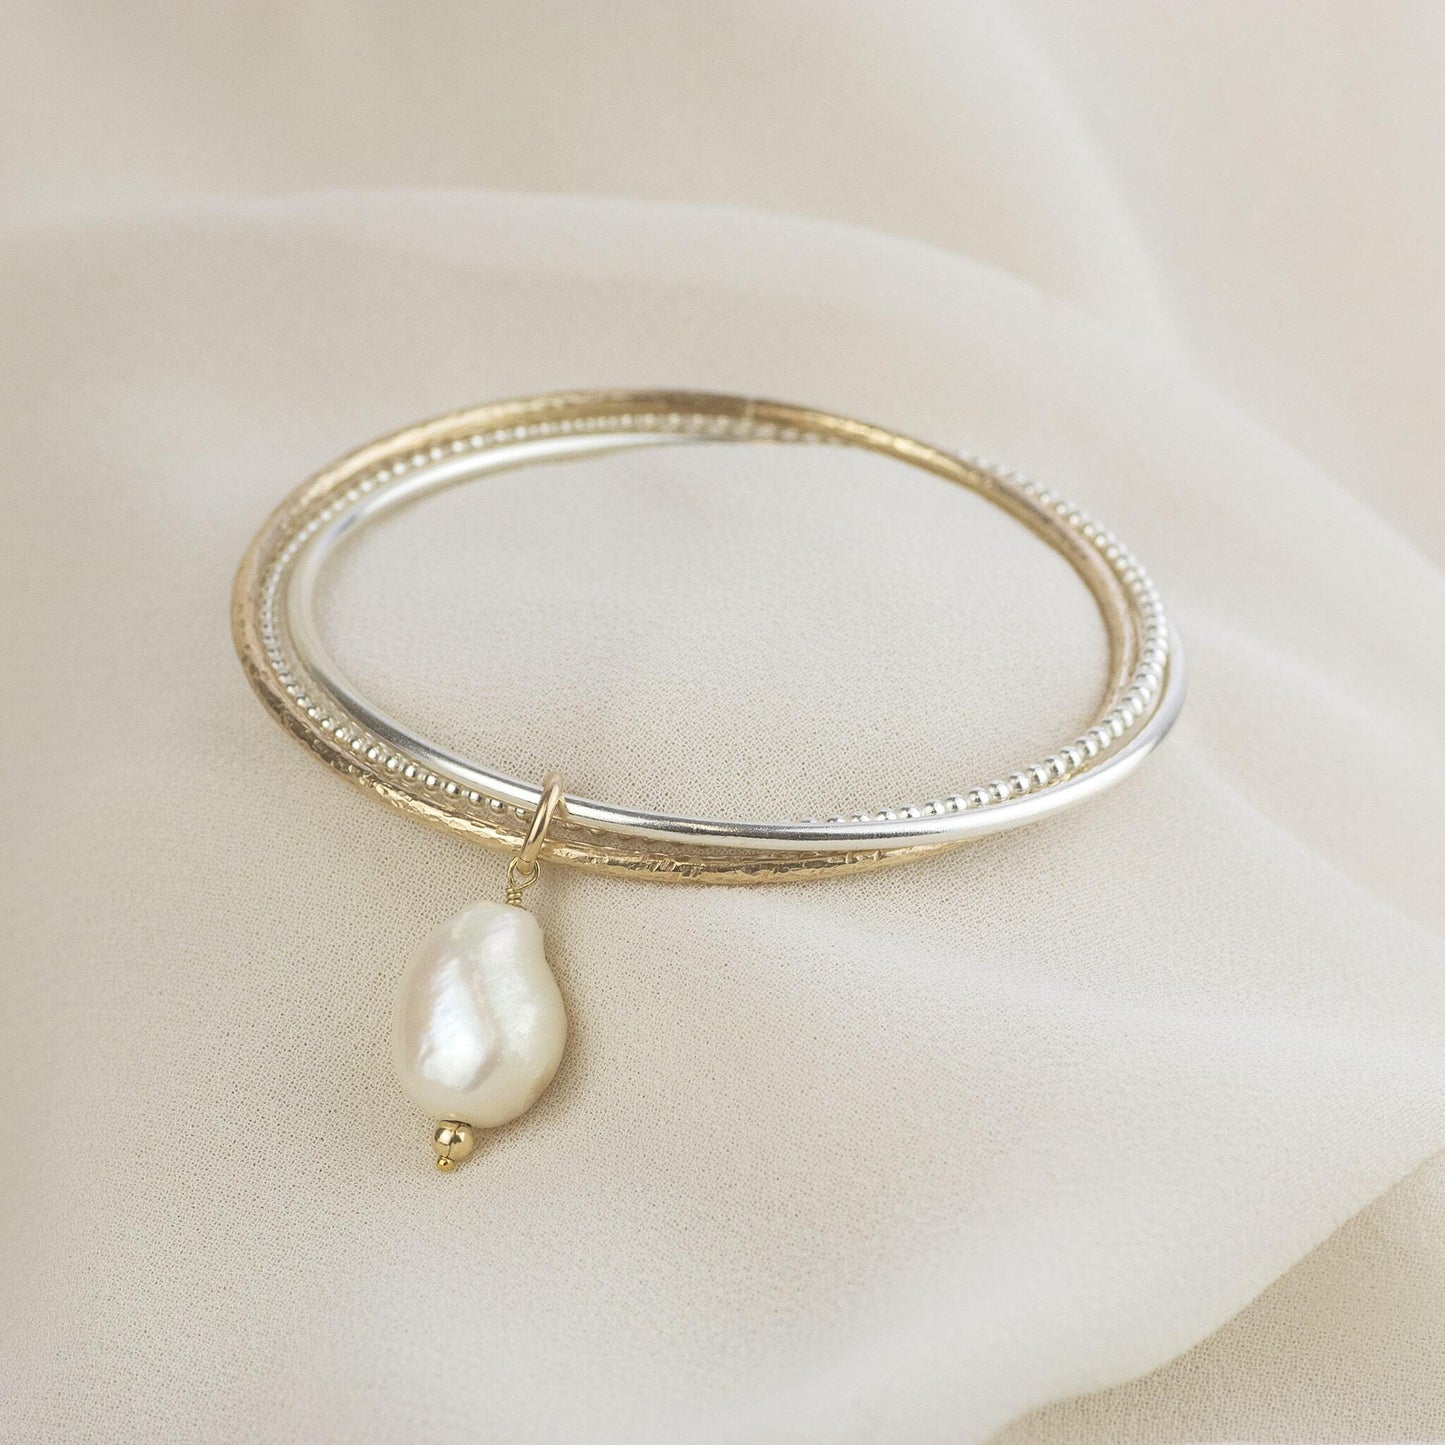 30th Wedding Anniversary Gift - 9kt Gold Triple Linked Bangle with Pearl